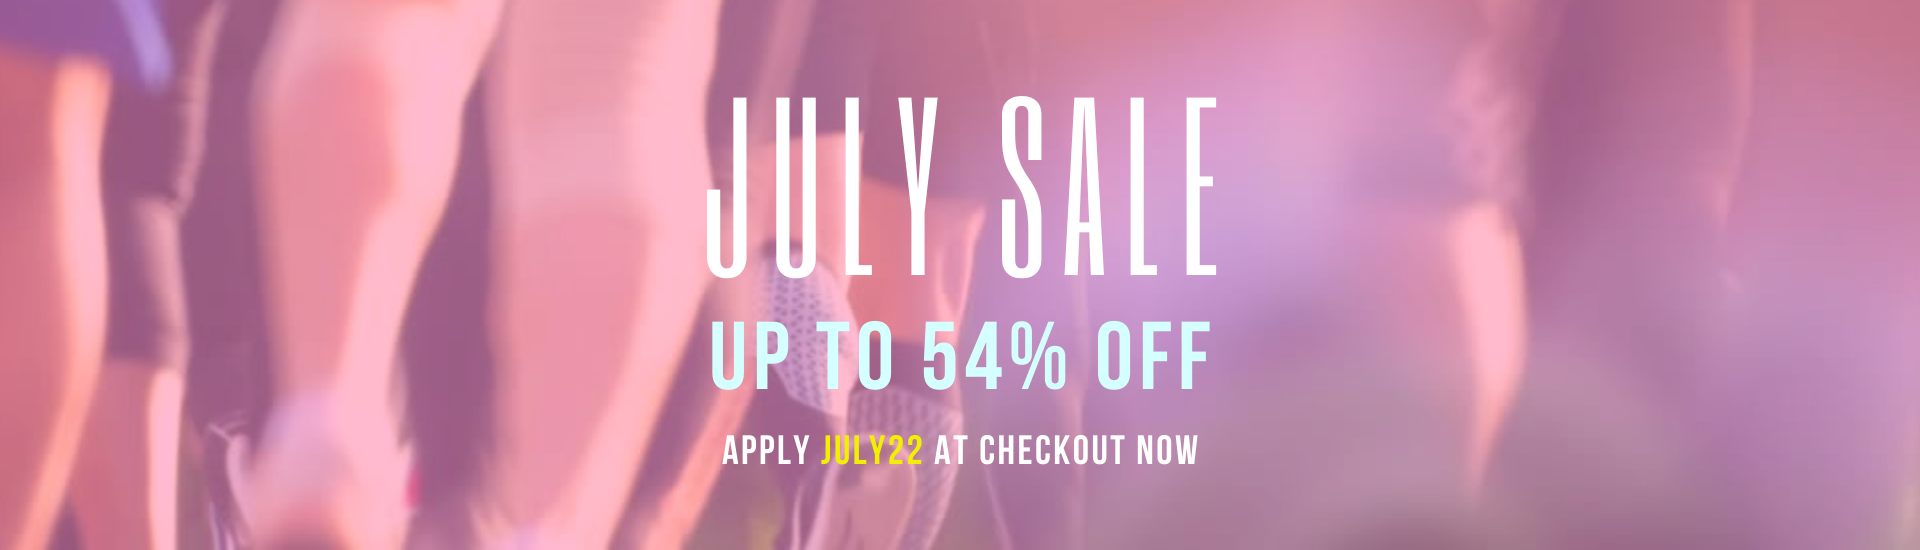 JULY SALE UP TO 54% OFF | RENPHO CANADA